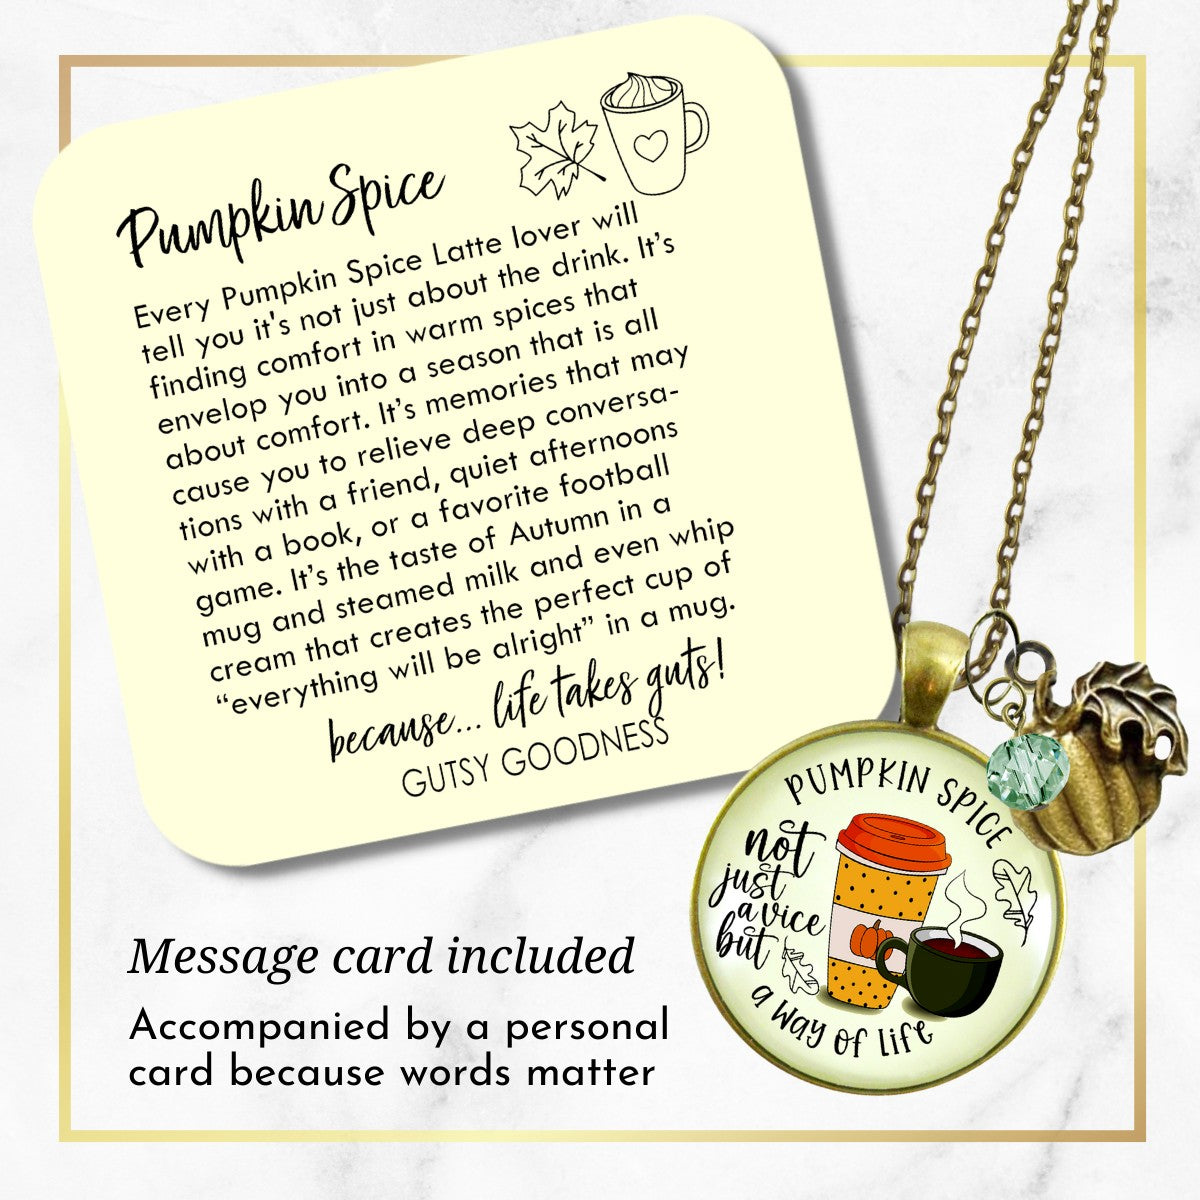 Pumpkin Spice Necklace Funny Quote Not a Vice, Way of Life Autumn PSL Coffee Latte Lover Costume Fashion Fall Jewelry For Women  Necklace - Gutsy Goodness Handmade Jewelry